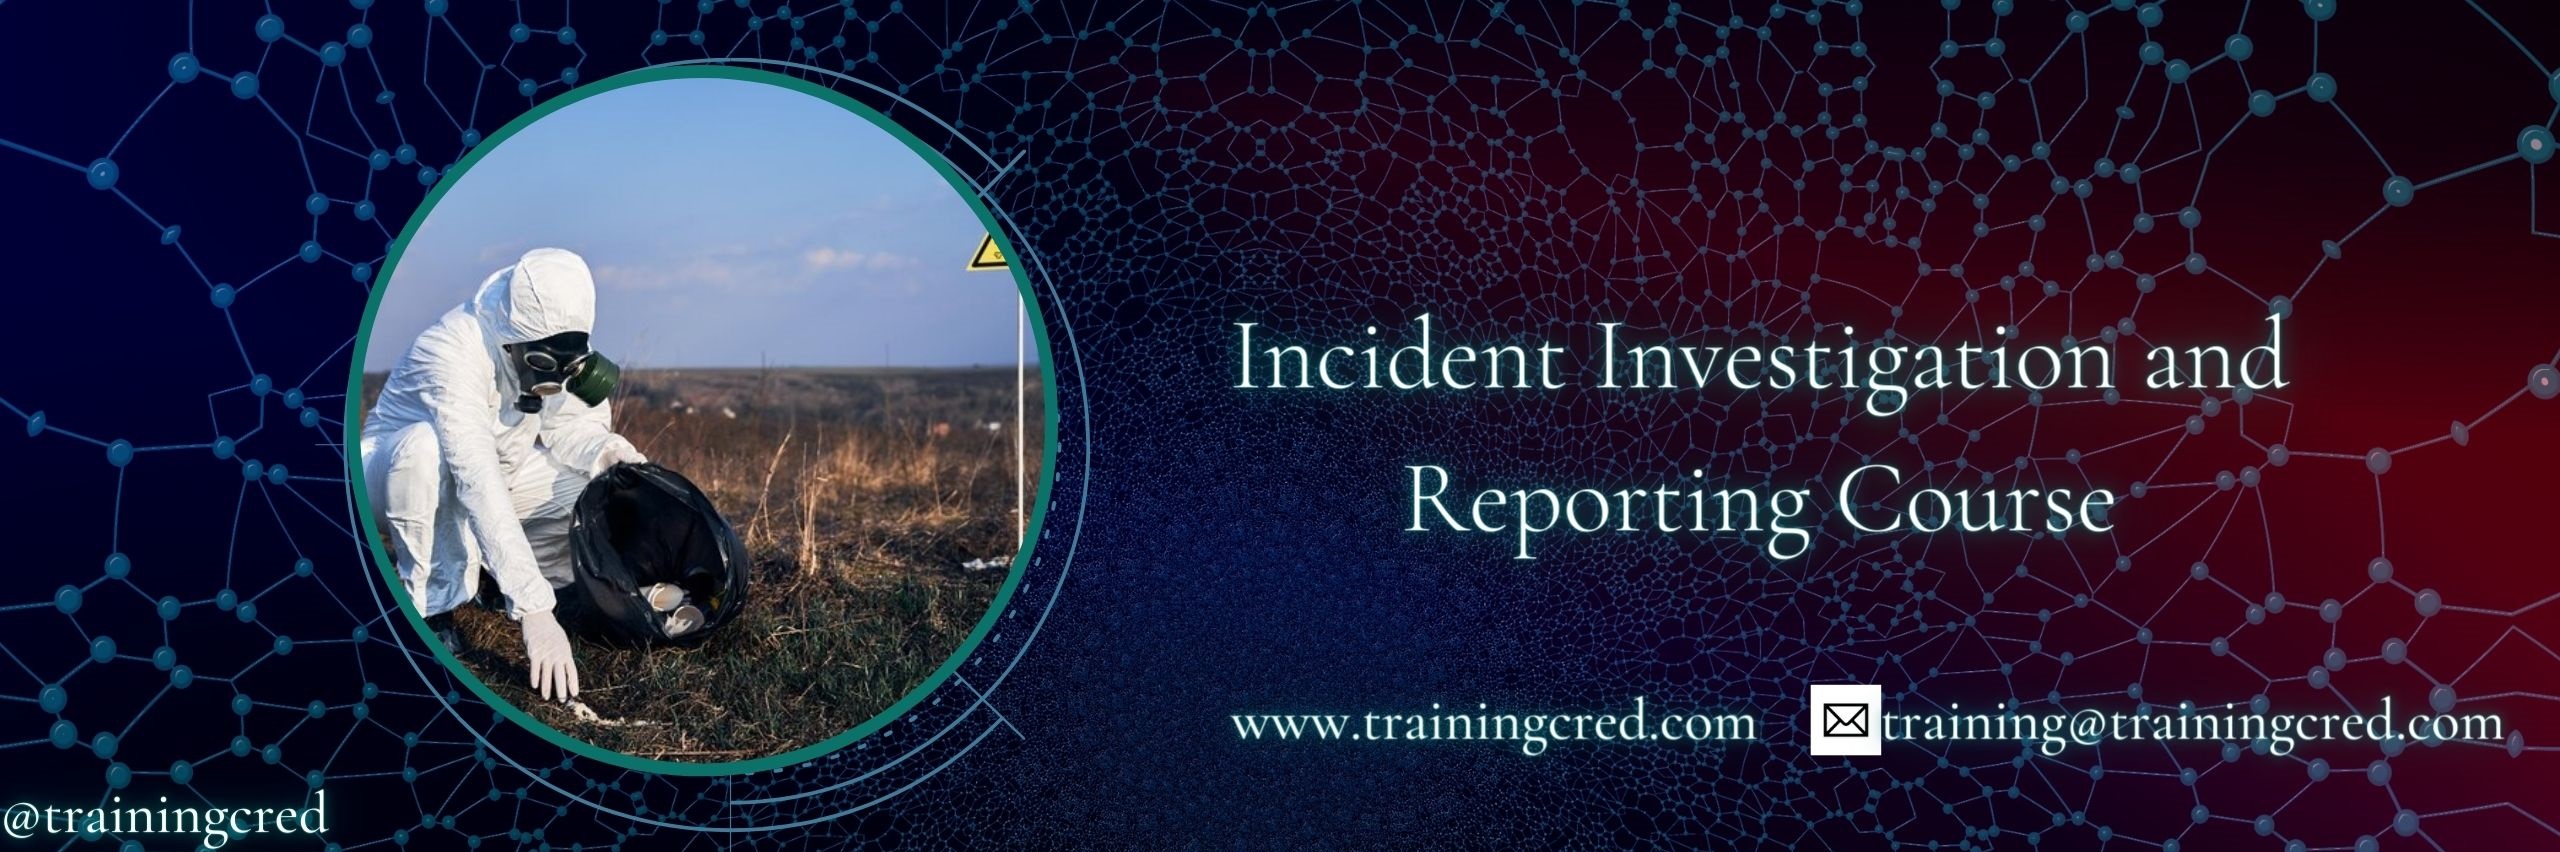 Incident Investigation and Reporting Training